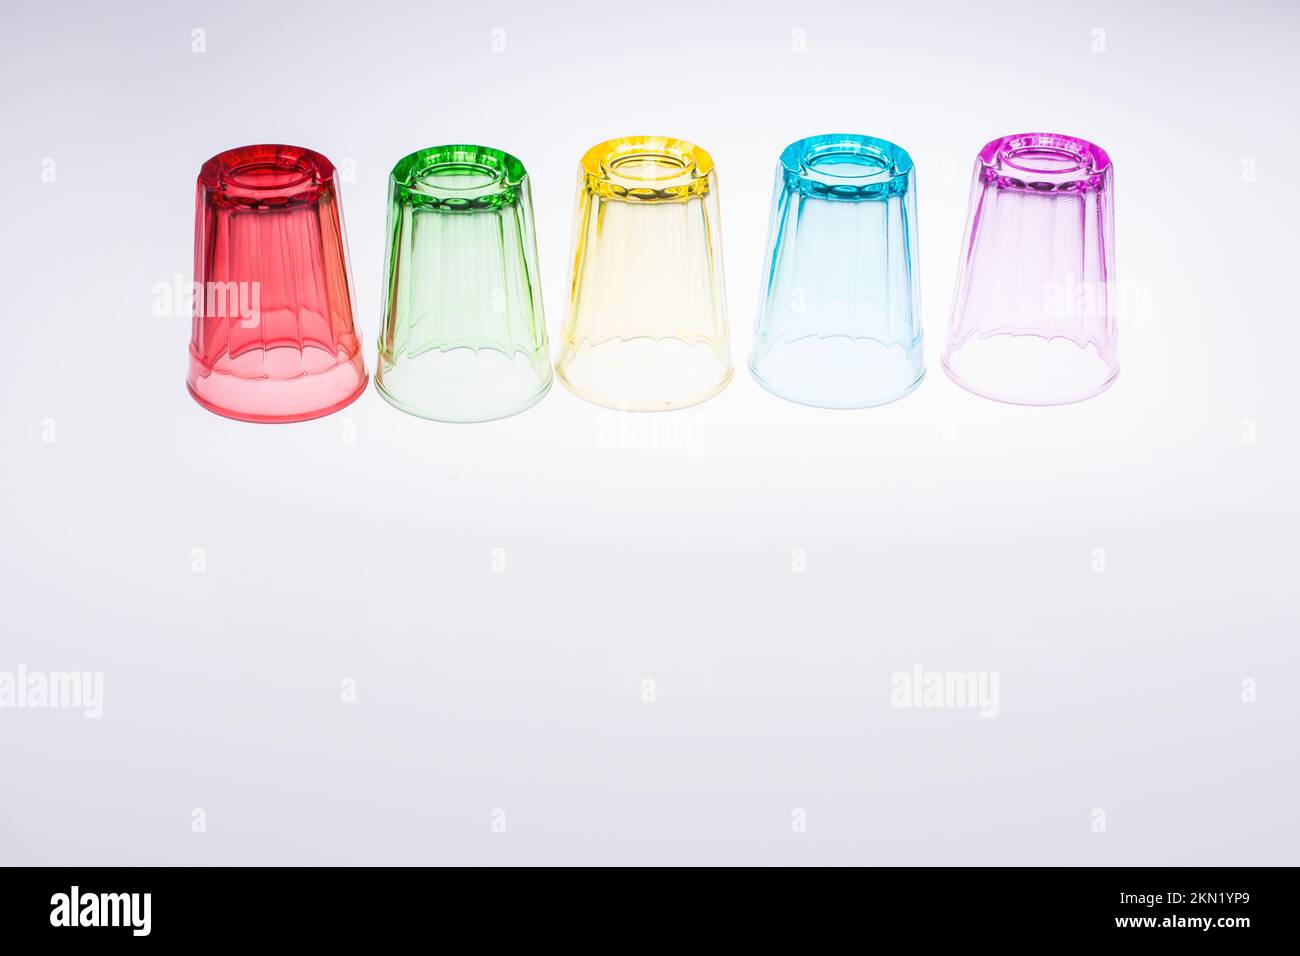 Colorful drinking glasses on white background Stock Photo